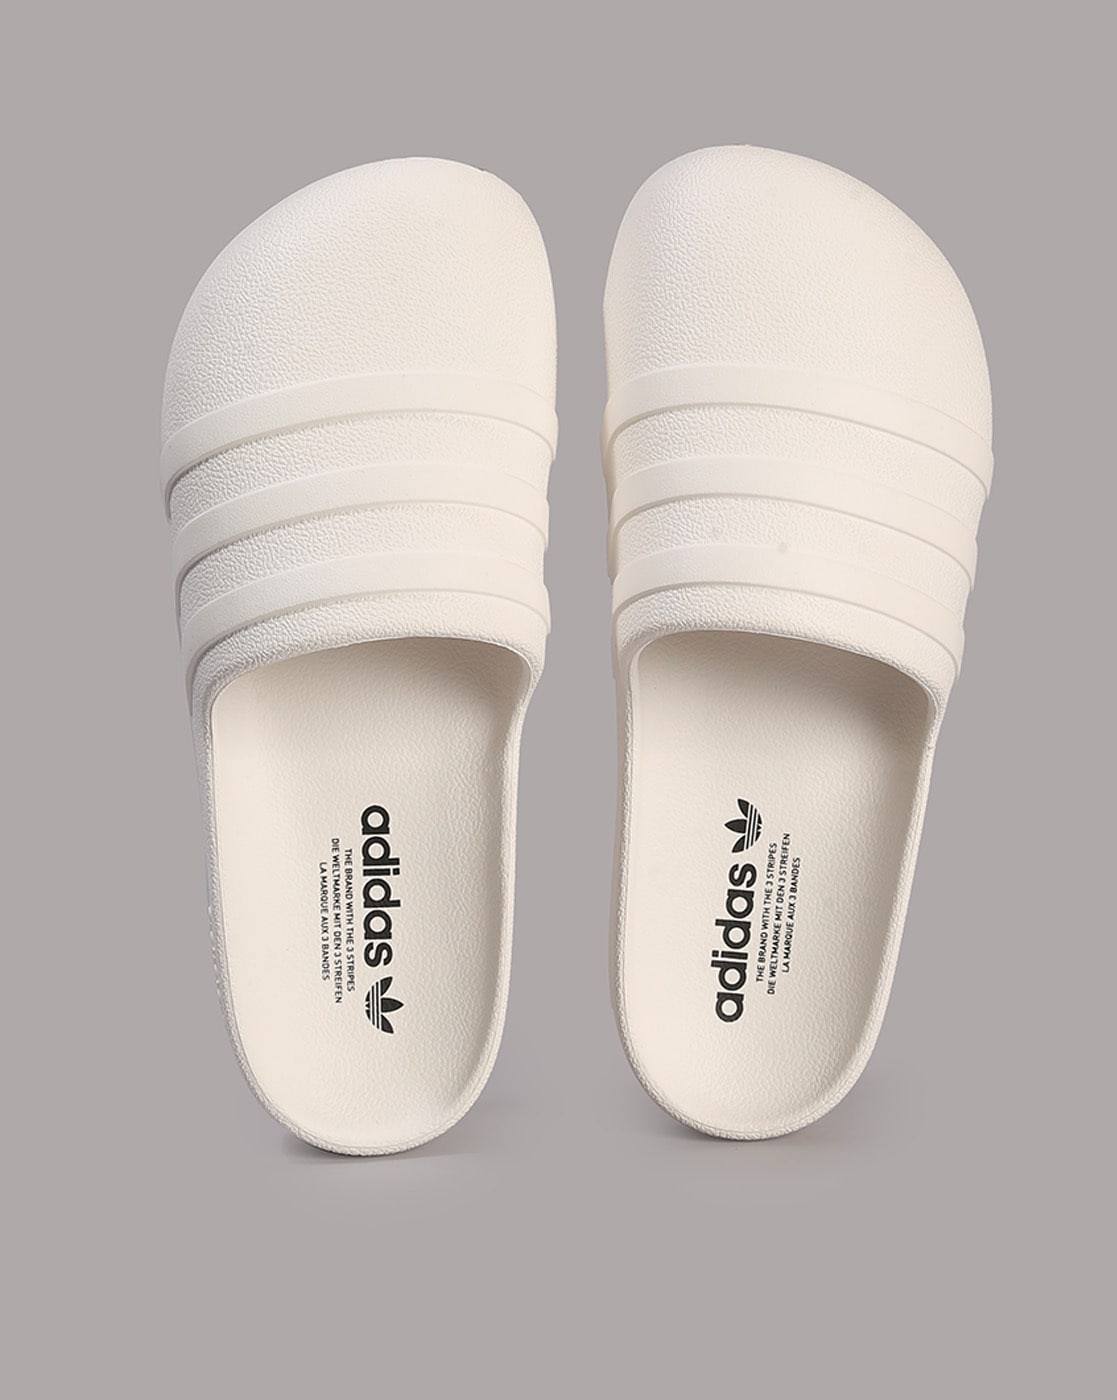 Discover more than 180 adidas slippers super hot